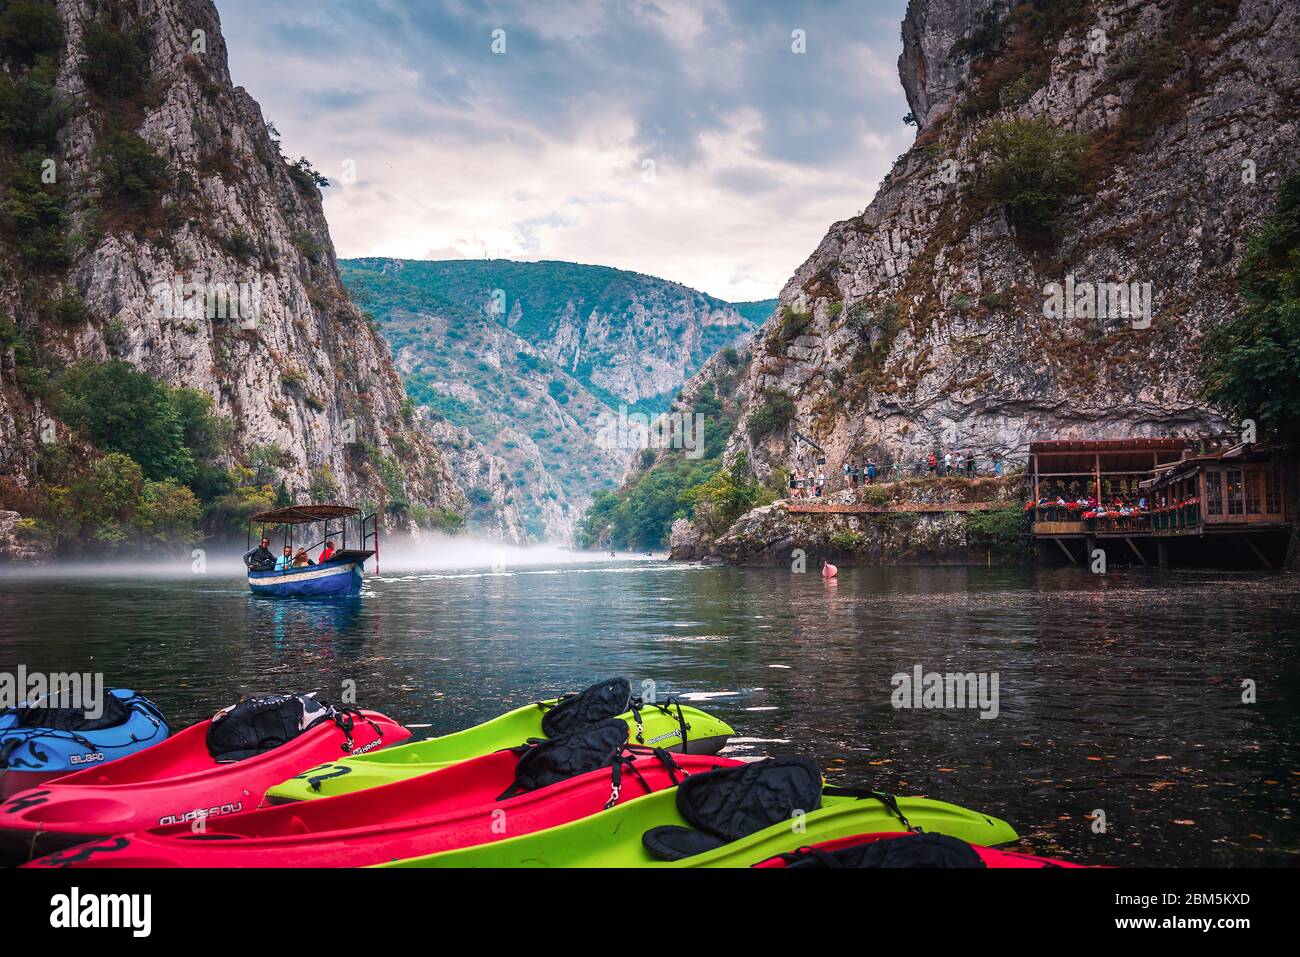 Matka, North Macedonia - August 26, 2018: Canyon Matka near Skopje, with people kayaking and magical foggy scenery with calm water Stock Photo